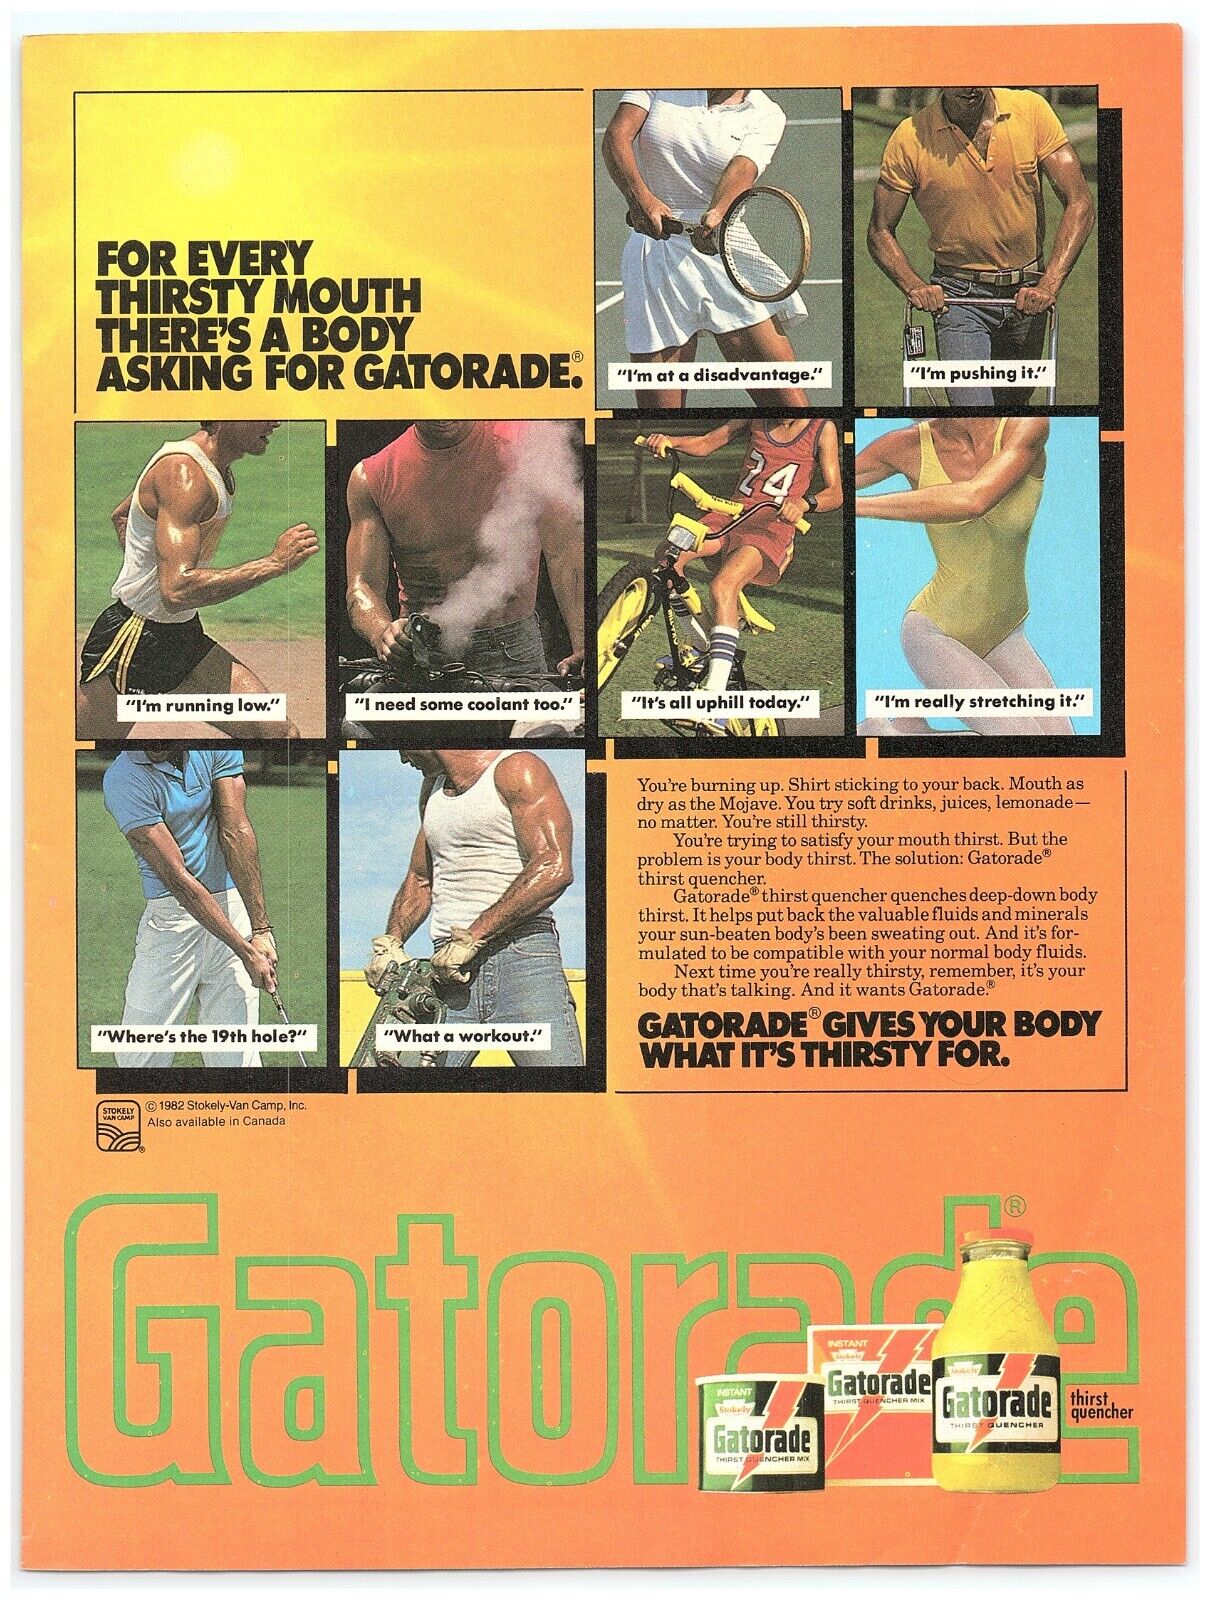 1982 Gatorade Print Ad, Gives Your Body What It\'s Thirsty For Torsos No Faces